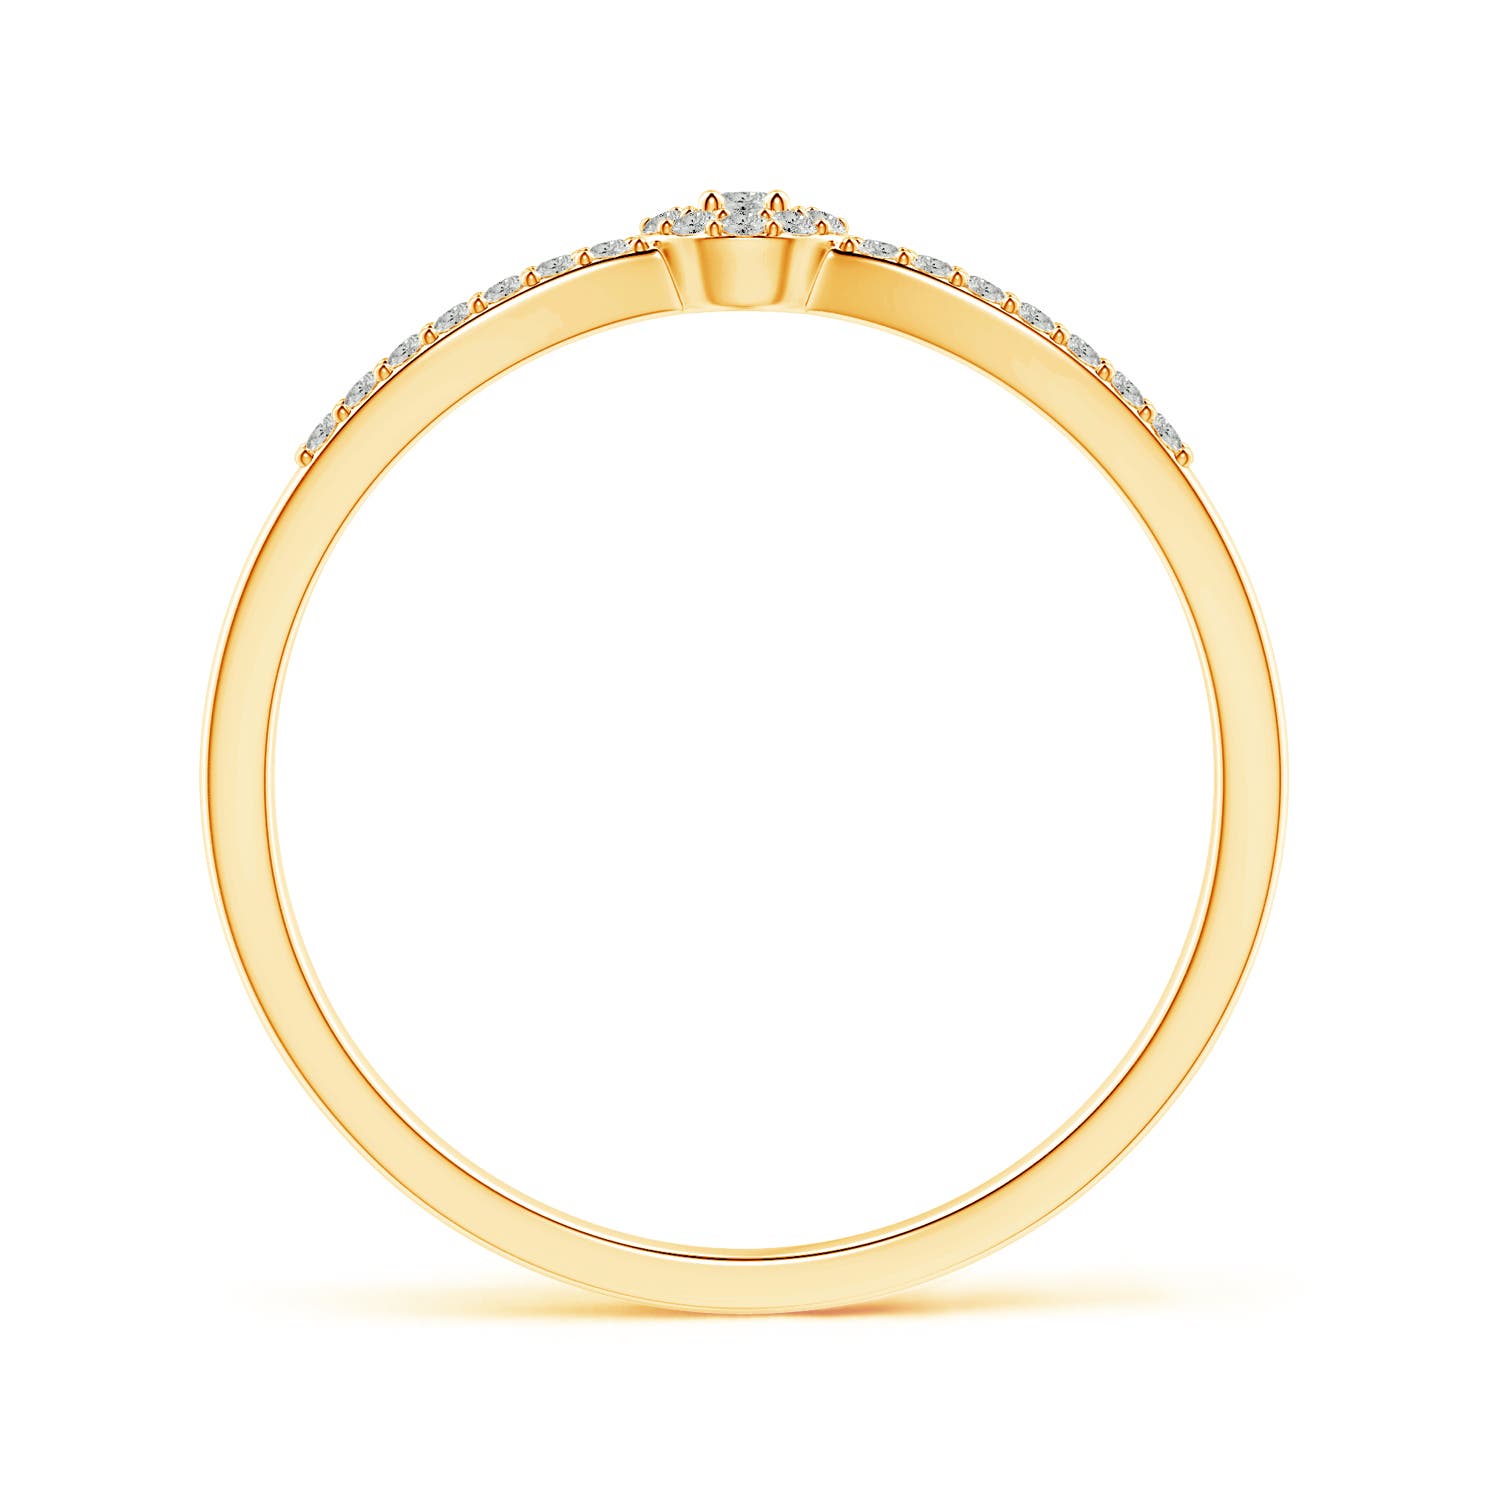 K, I3 / 0.15 CT / 14 KT Yellow Gold